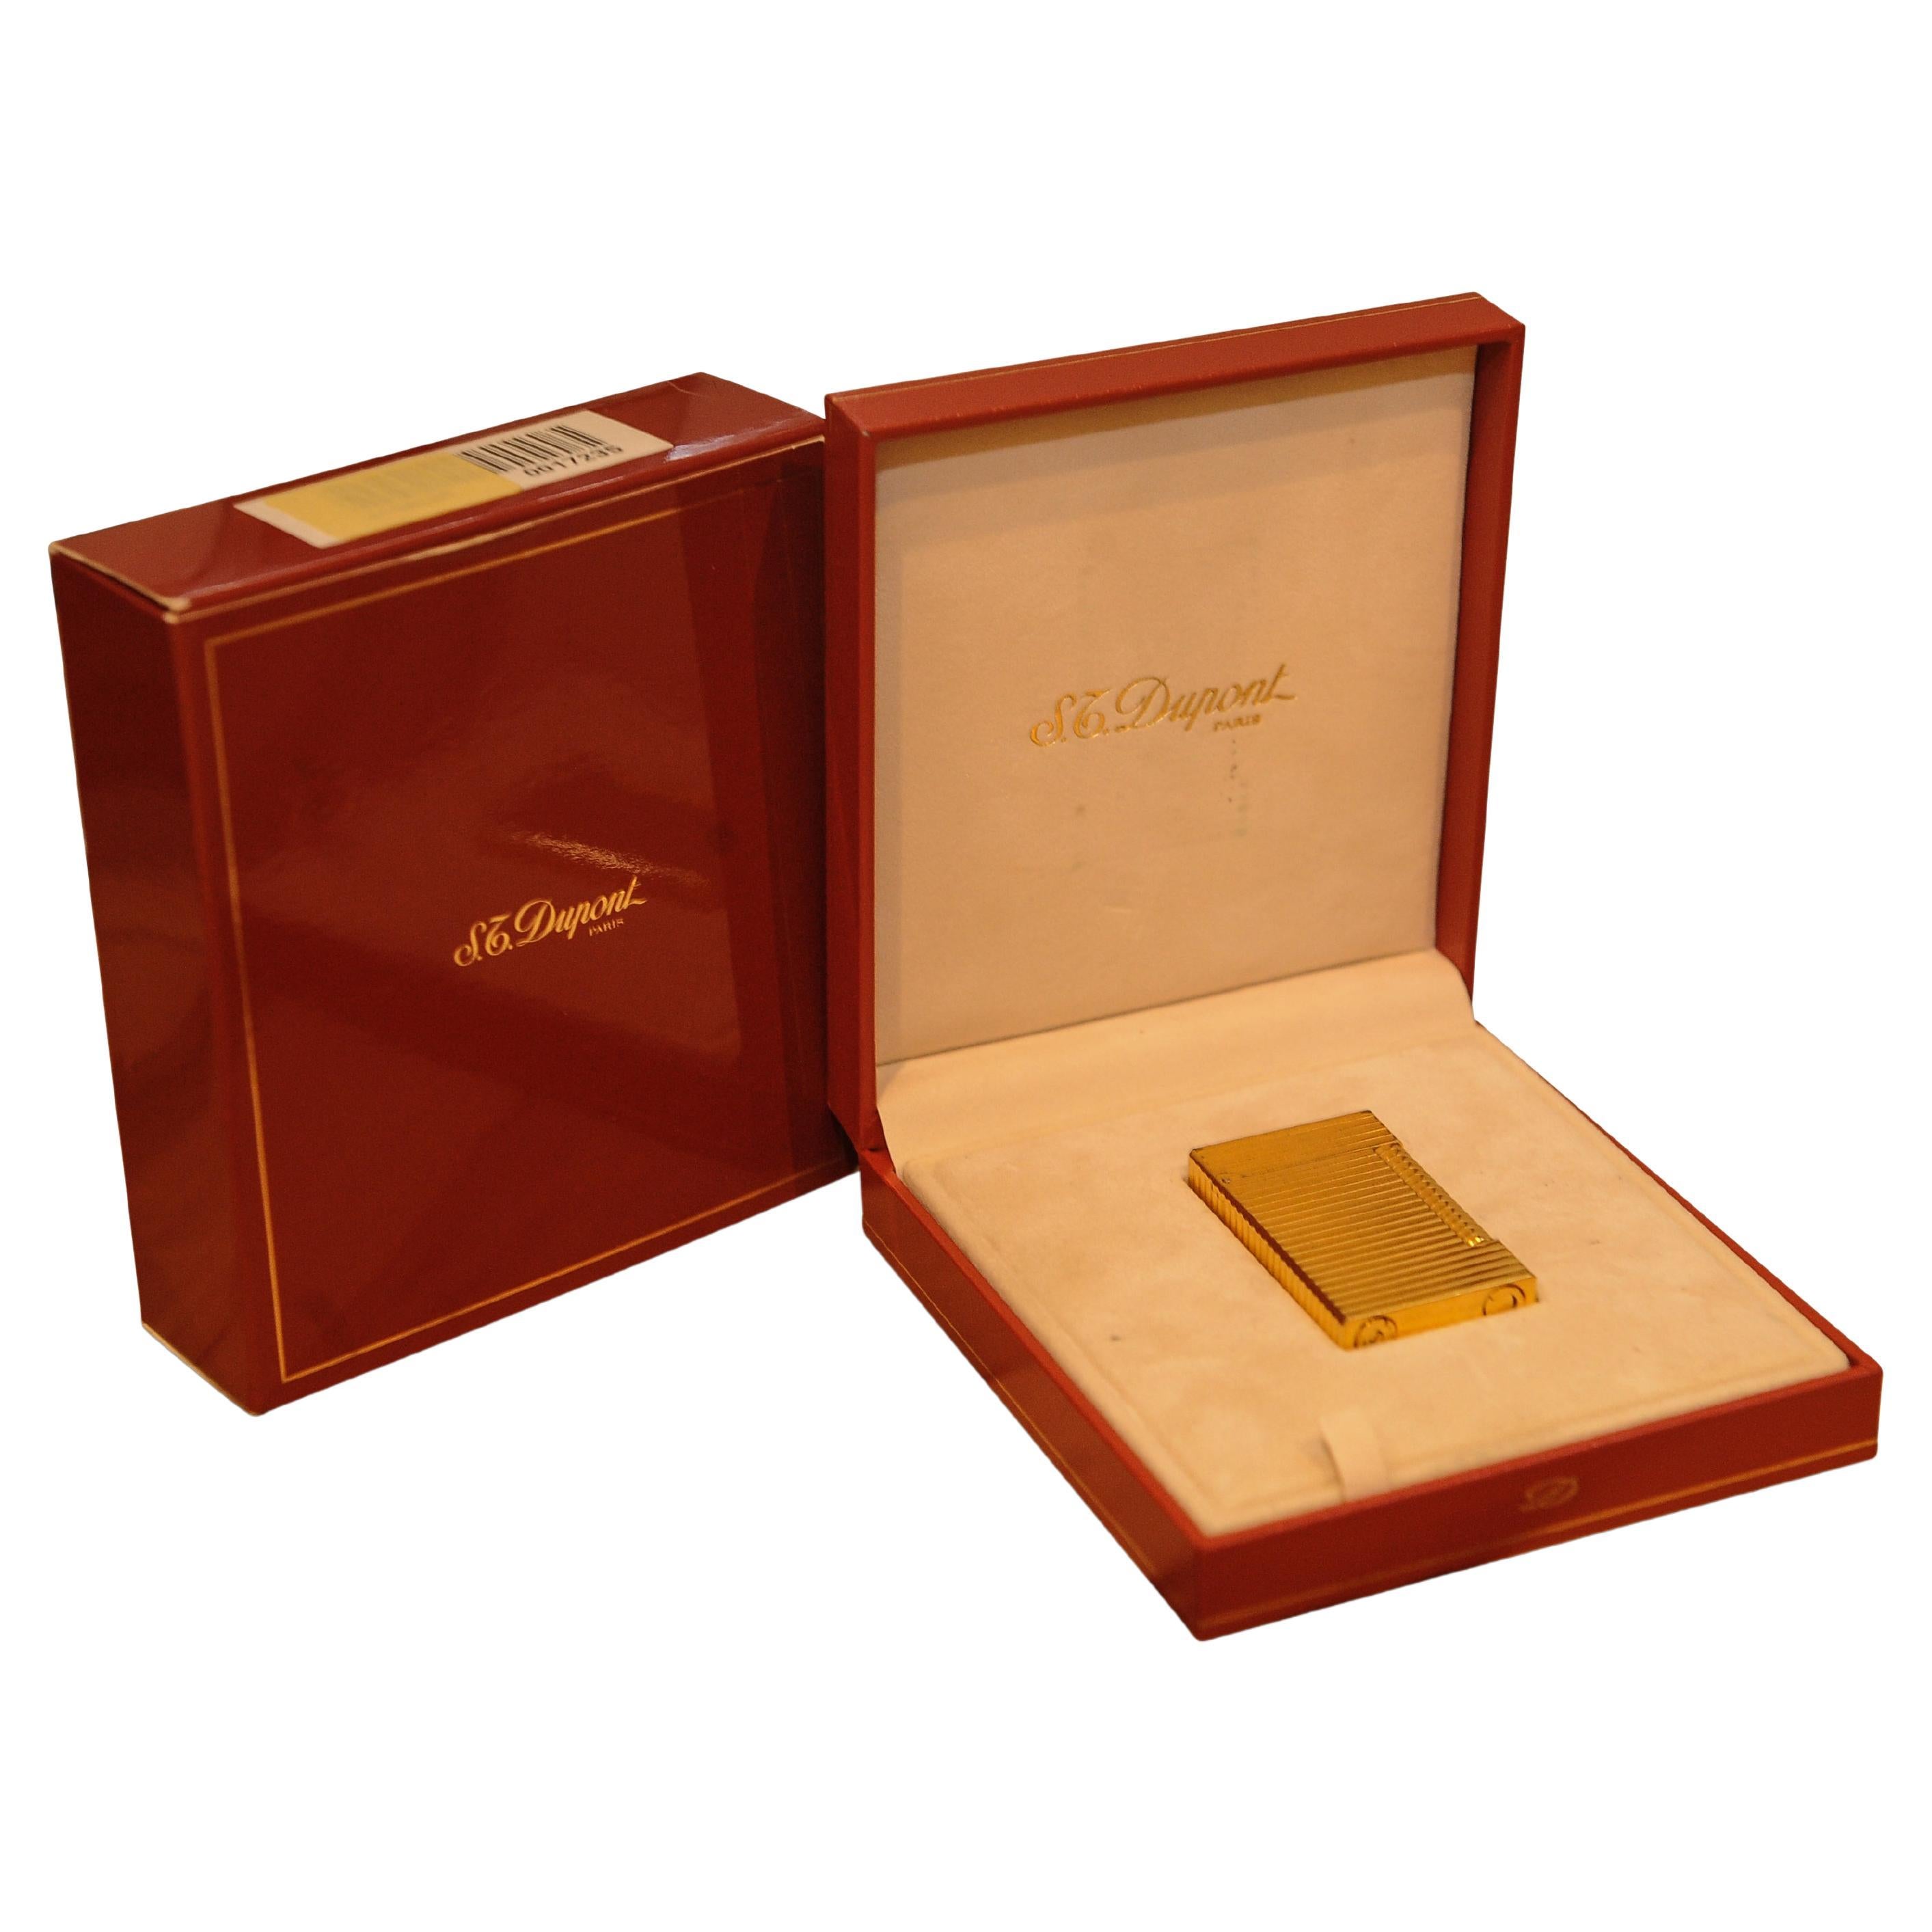 S.T. Dupont Briquet De Poche LD Plaque Gas Cigarette Lighter With Original Box and Papers 

Stamped 100NL95 
No 2294

Made in Paris, France 
Purchase receipt shoes 4/2/1995 Goldsmith, Eastbourne, UK 

